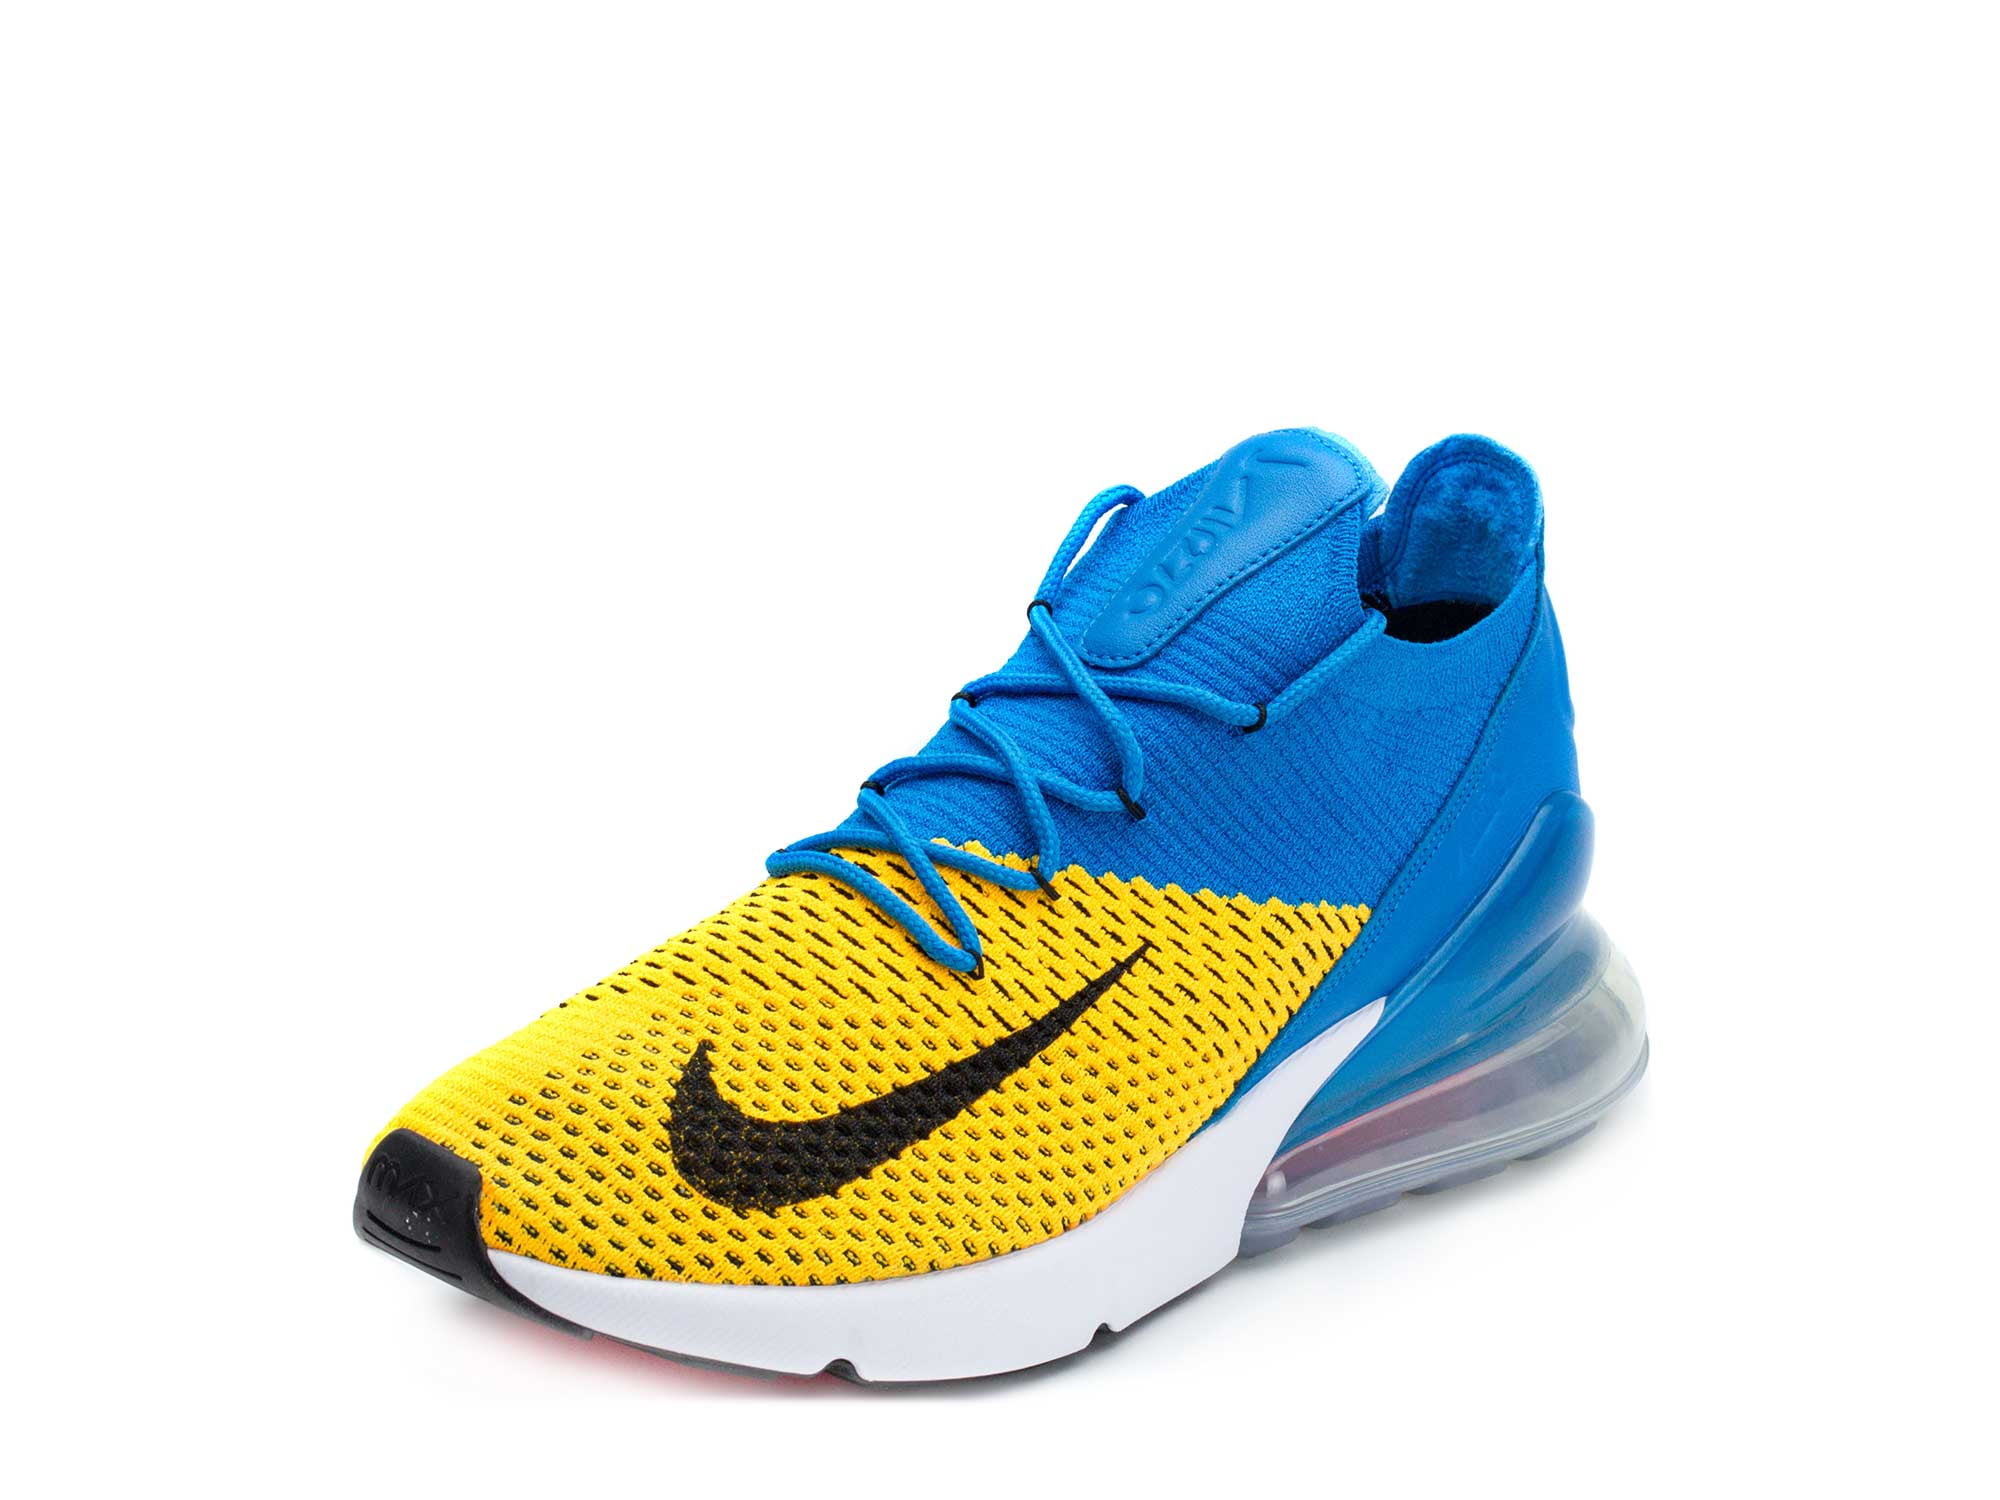 air max 270 flyknit blue yellow